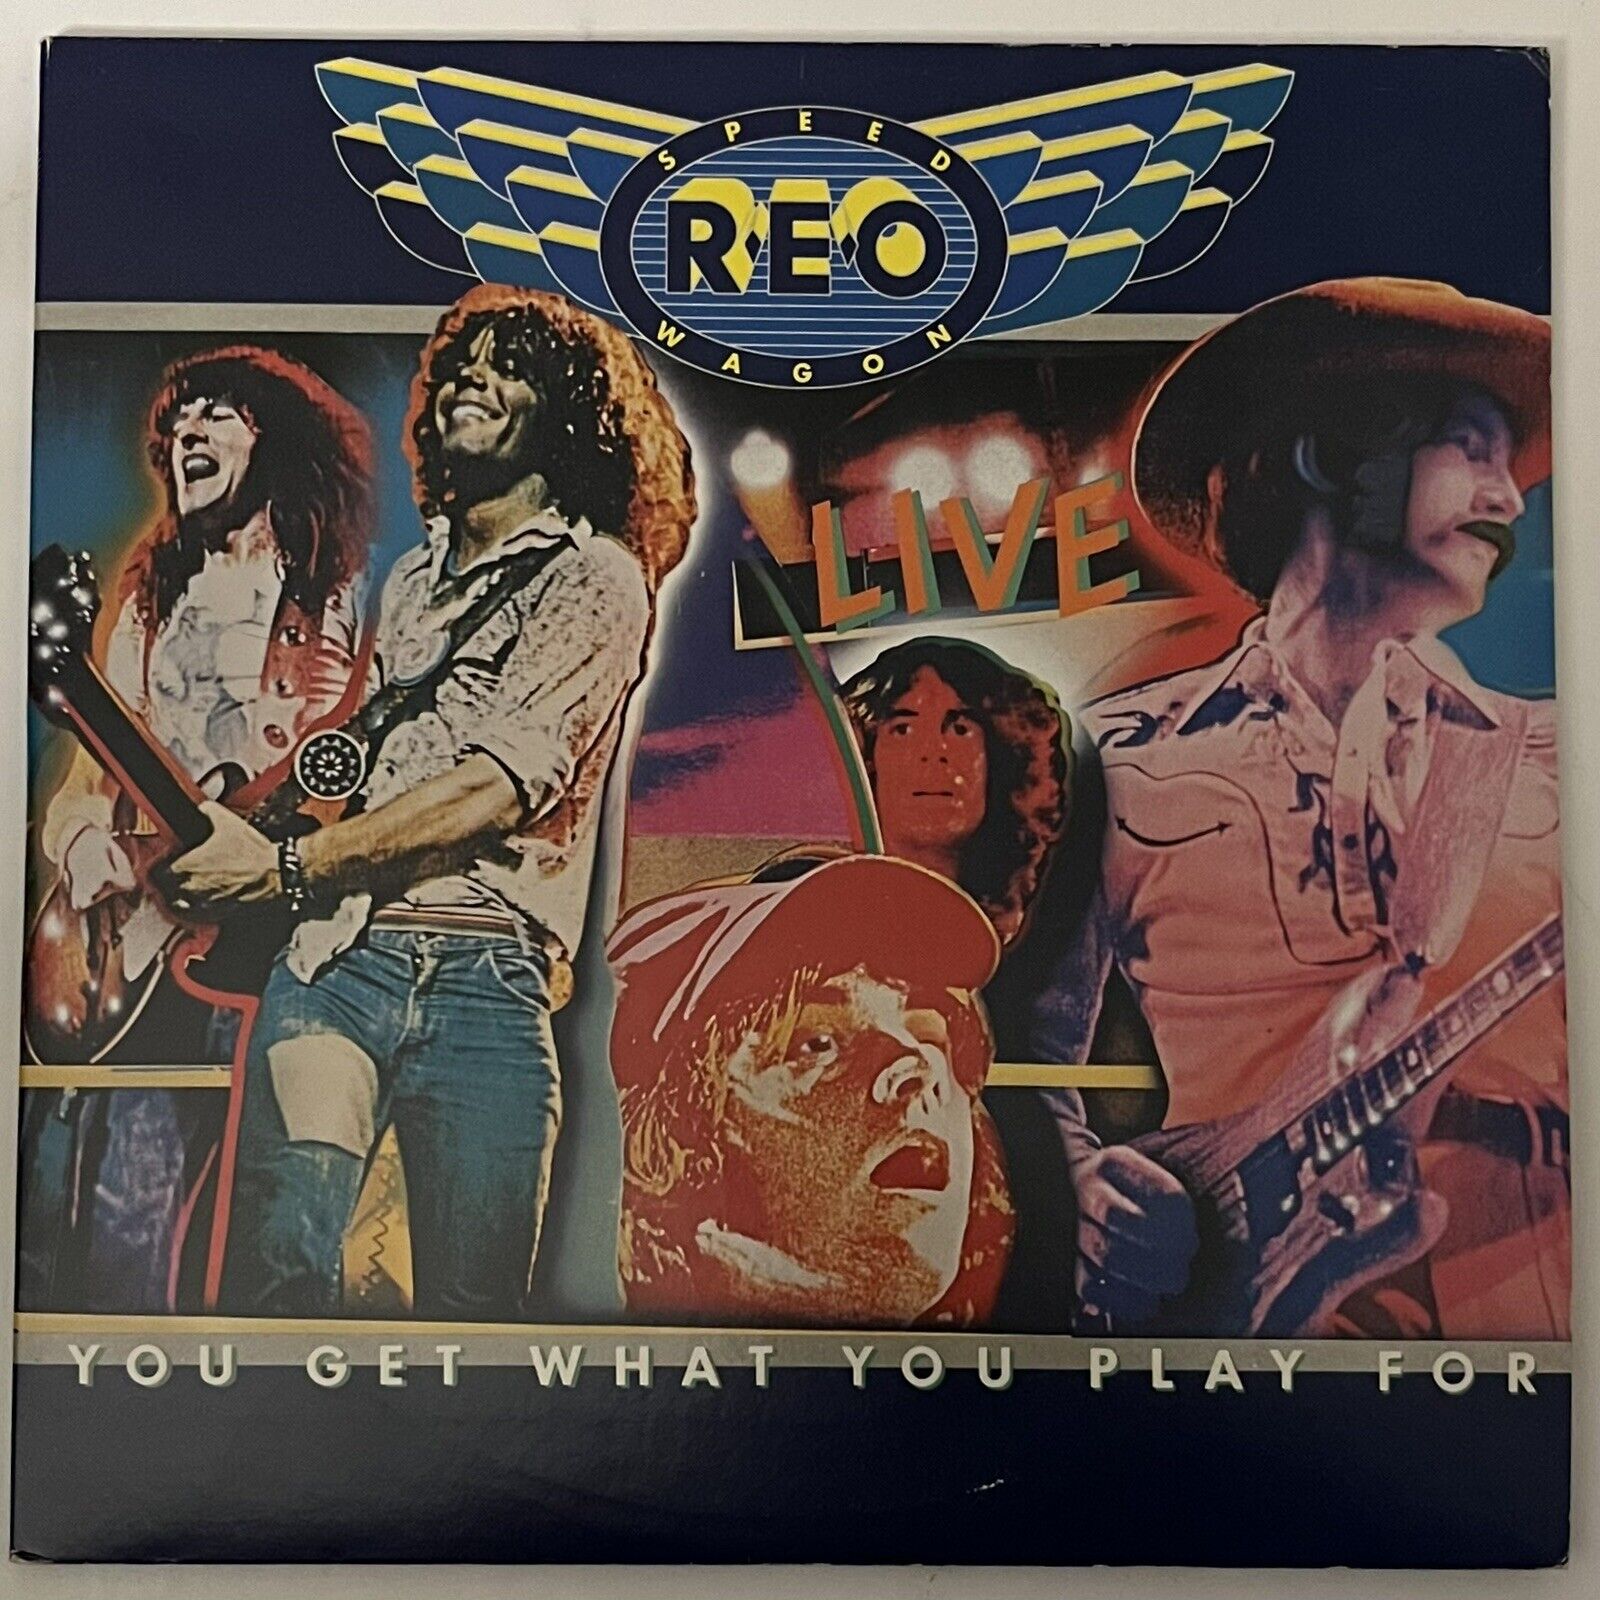 REO Speedwagon - Live You Get What You Play For 2LP Vinyl - Epic - 1977 - Rock